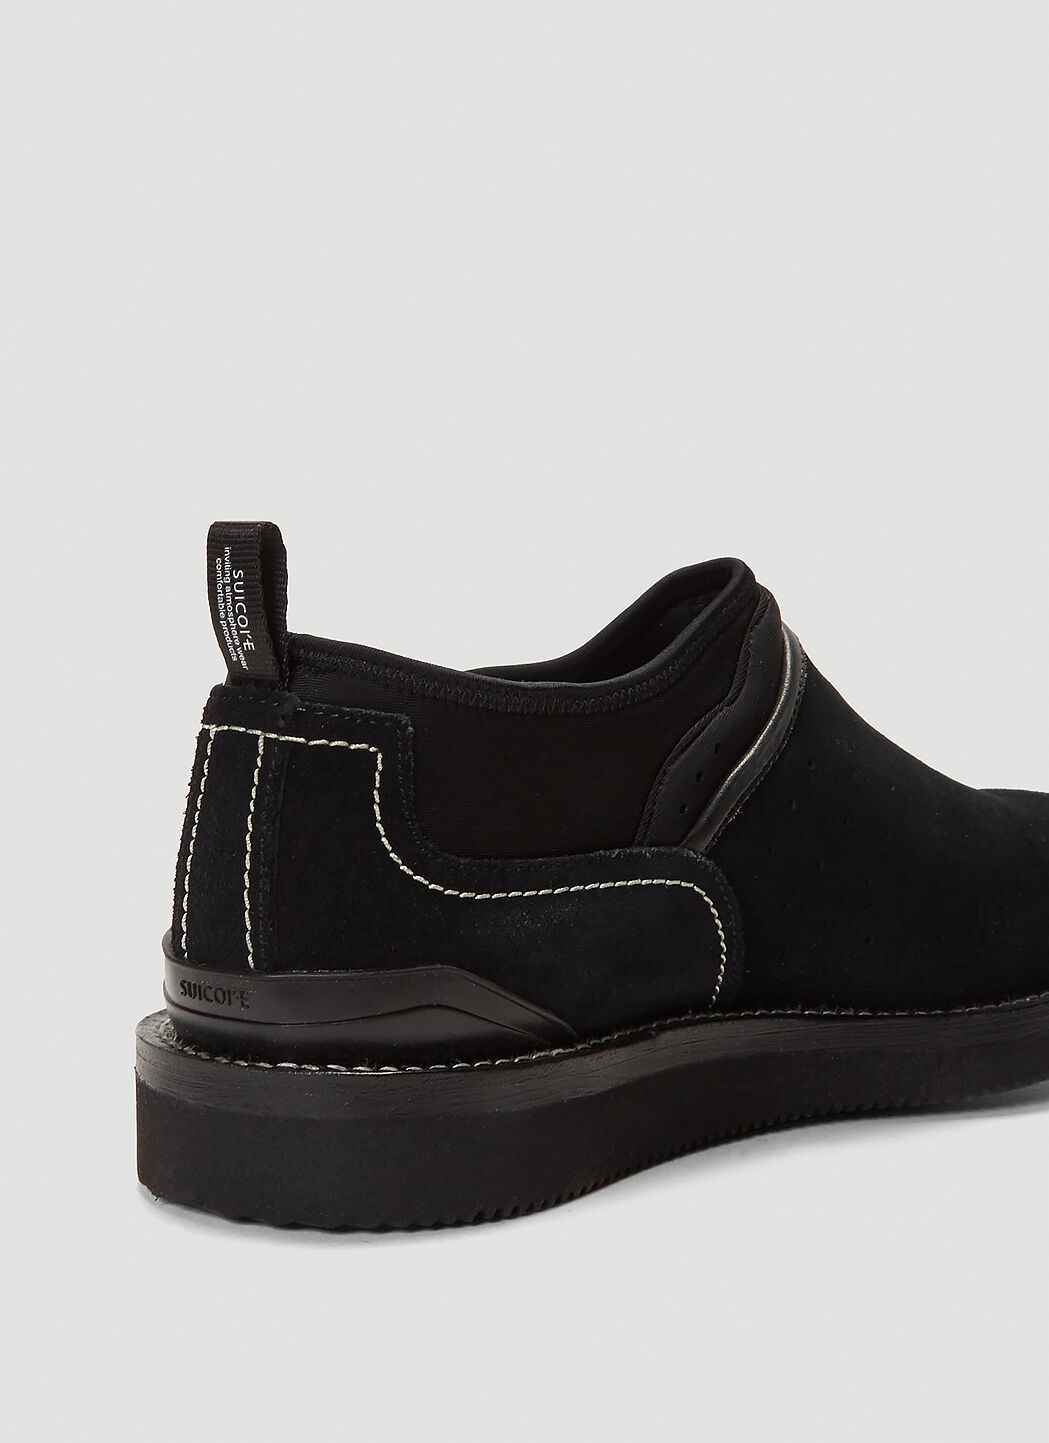 SGY03 Slip-On Ankle Boots - 5